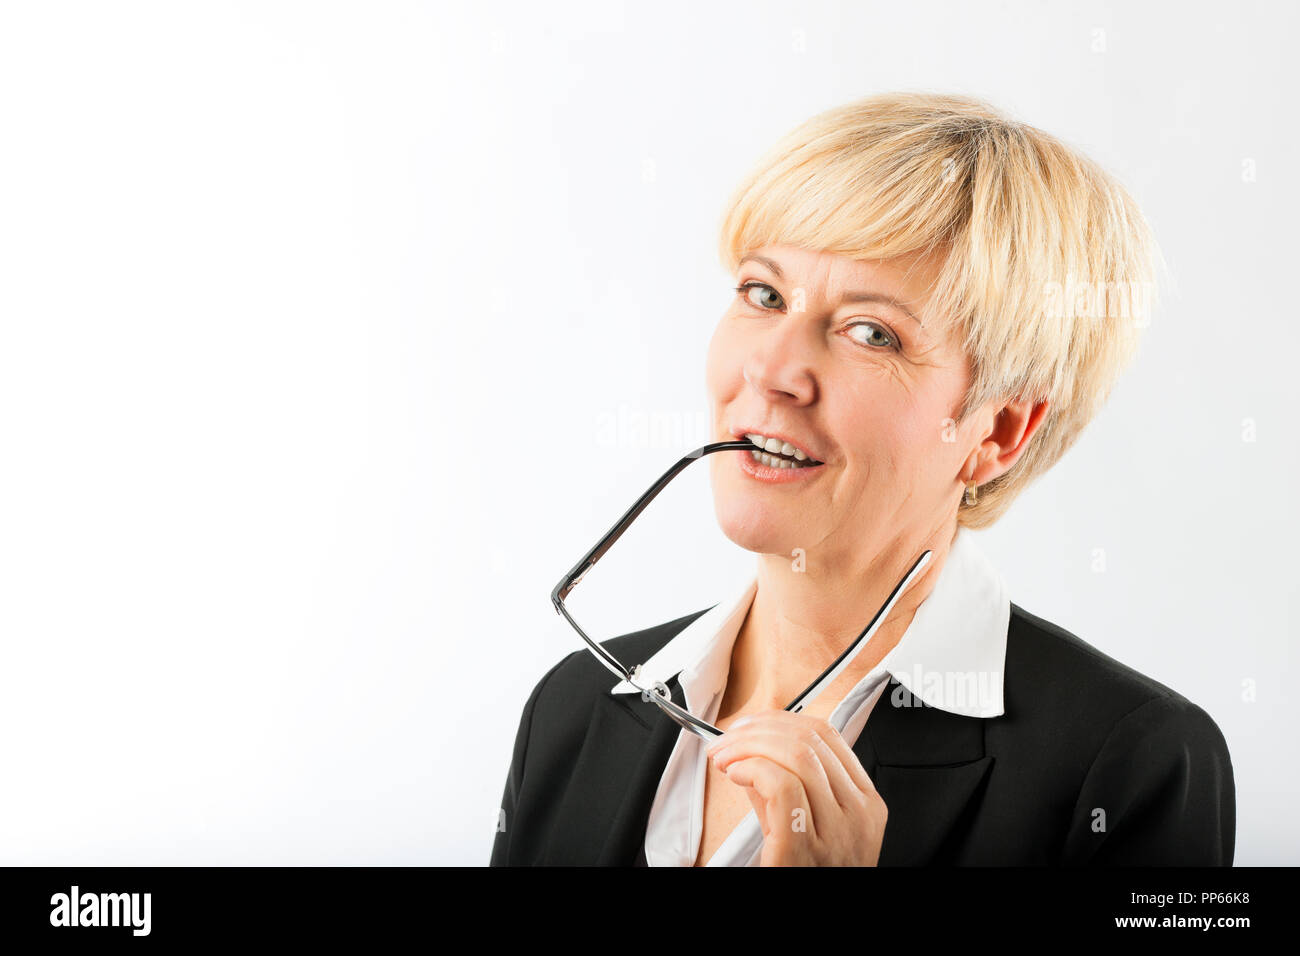 Mature businesswoman with eyeglasses earpiece in mouth Stock Photo